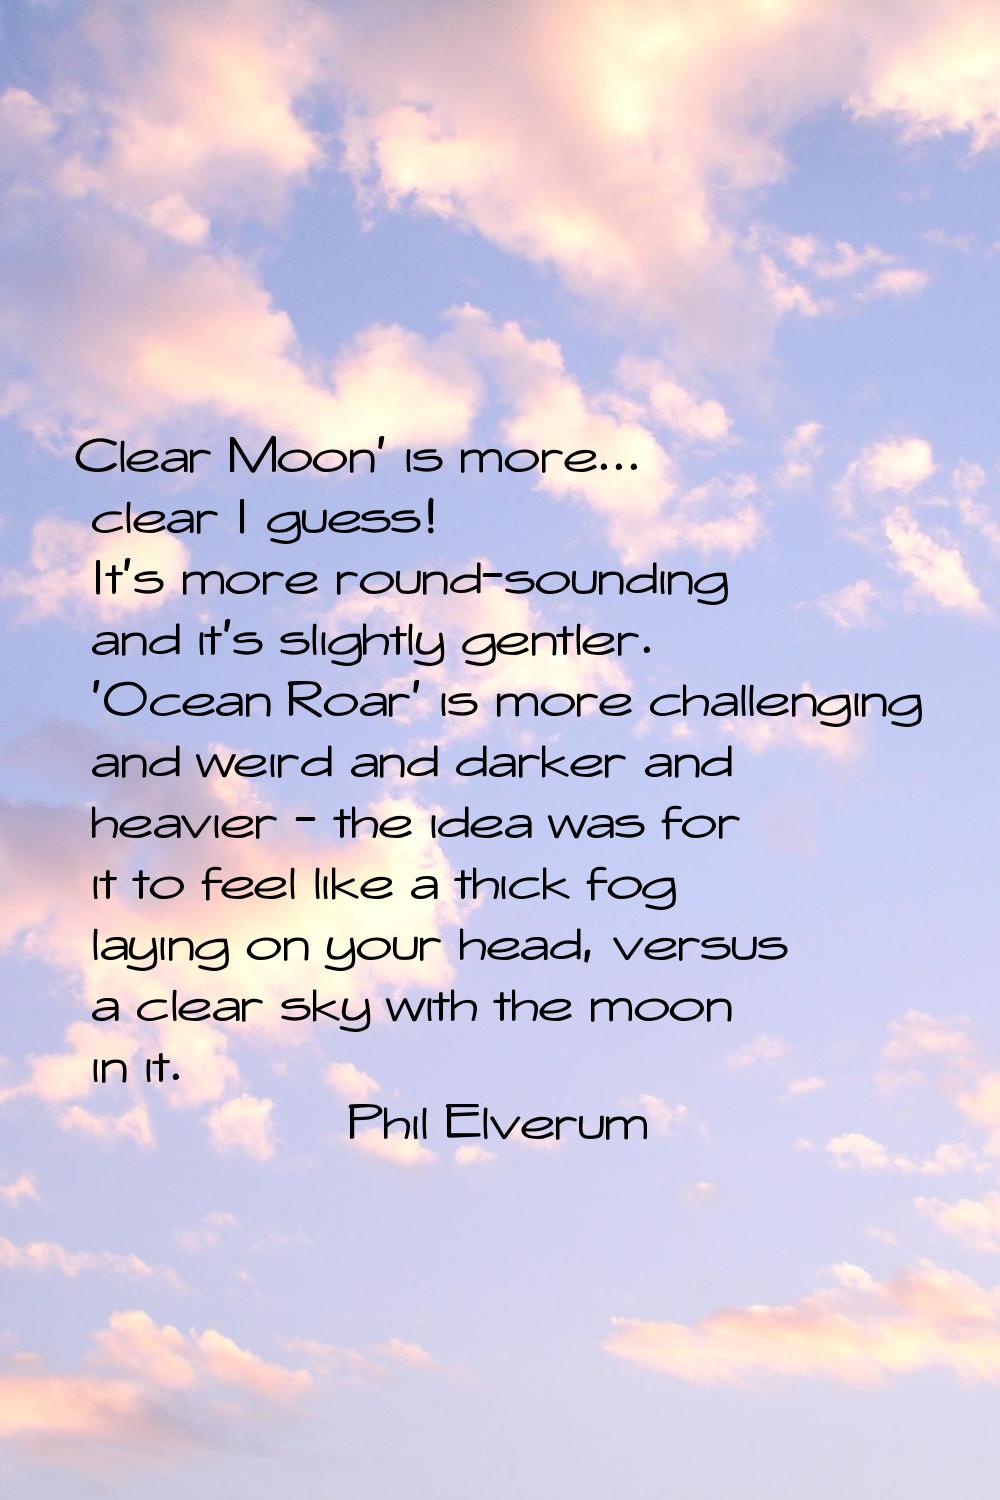 Clear Moon' is more... clear I guess! It's more round-sounding and it's slightly gentler. 'Ocean Ro